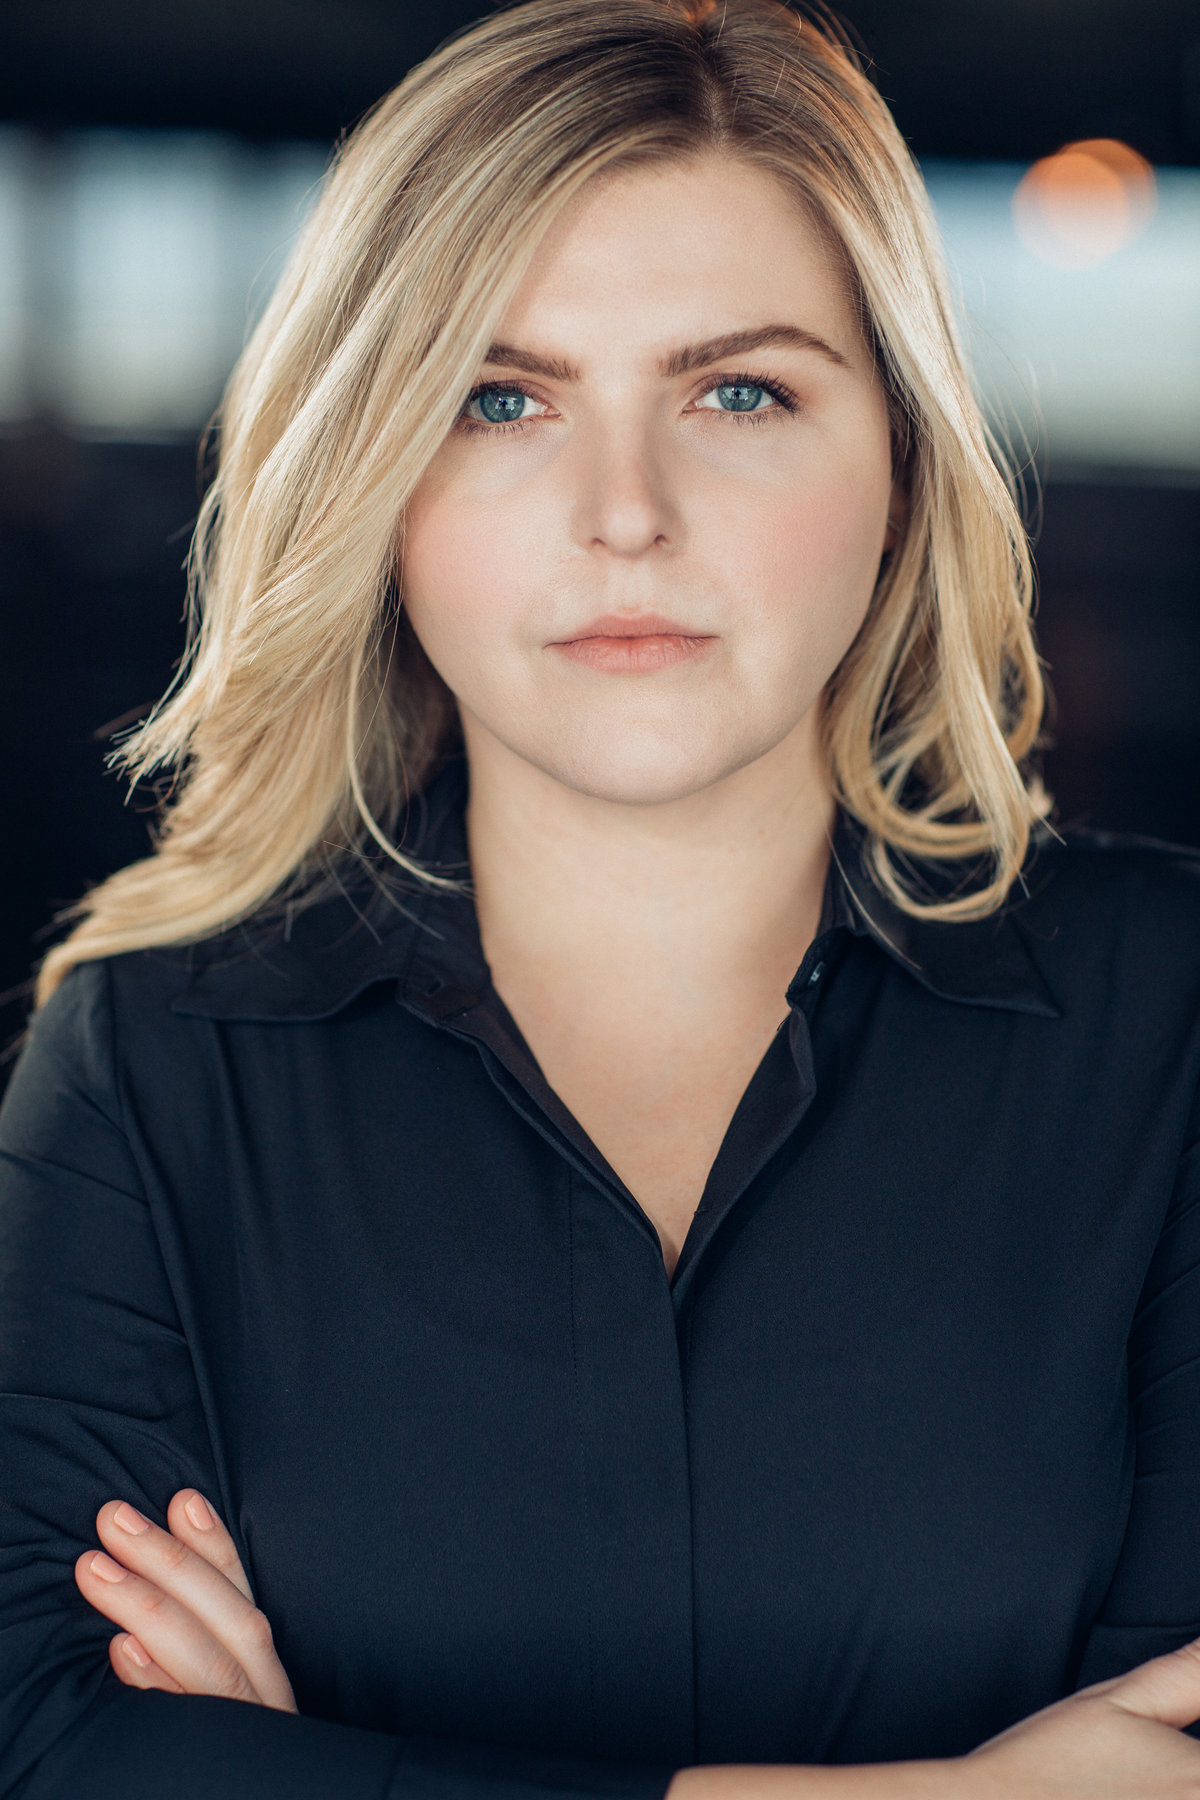 Headshot Photograph Of Young Woman In Black Polo Los Angeles